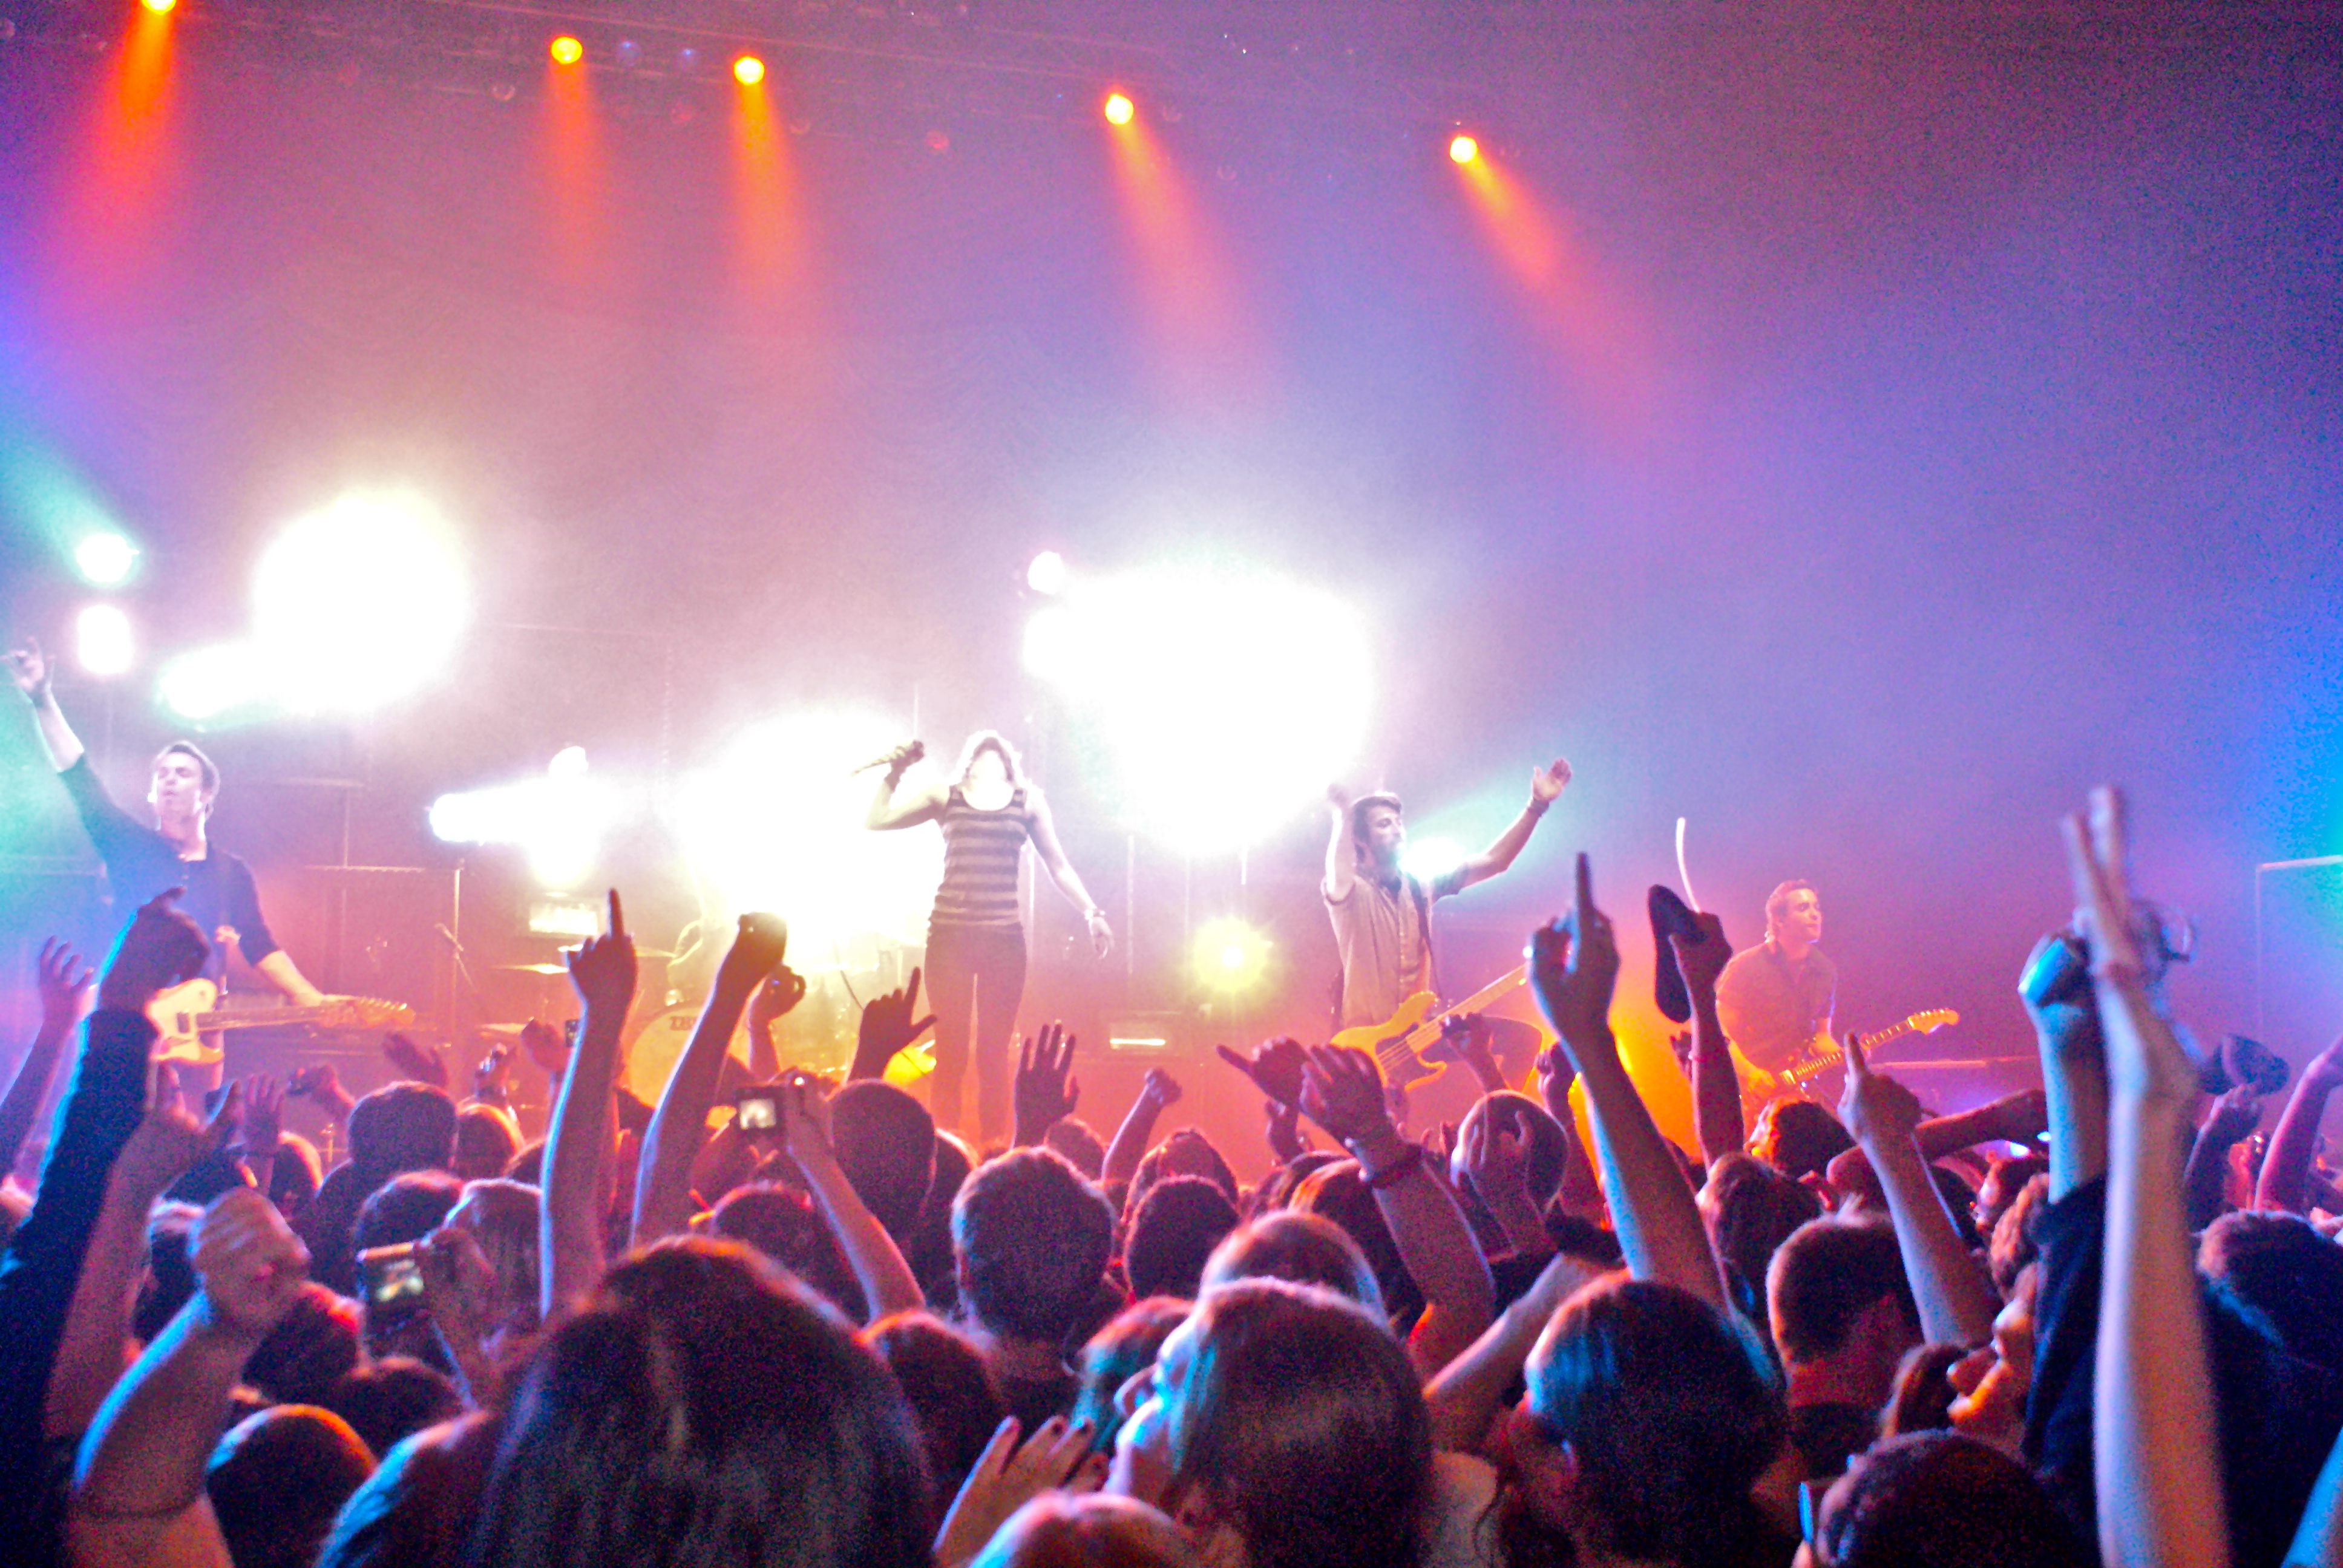 File:Paramore Concert.jpg - Wikimedia Commons